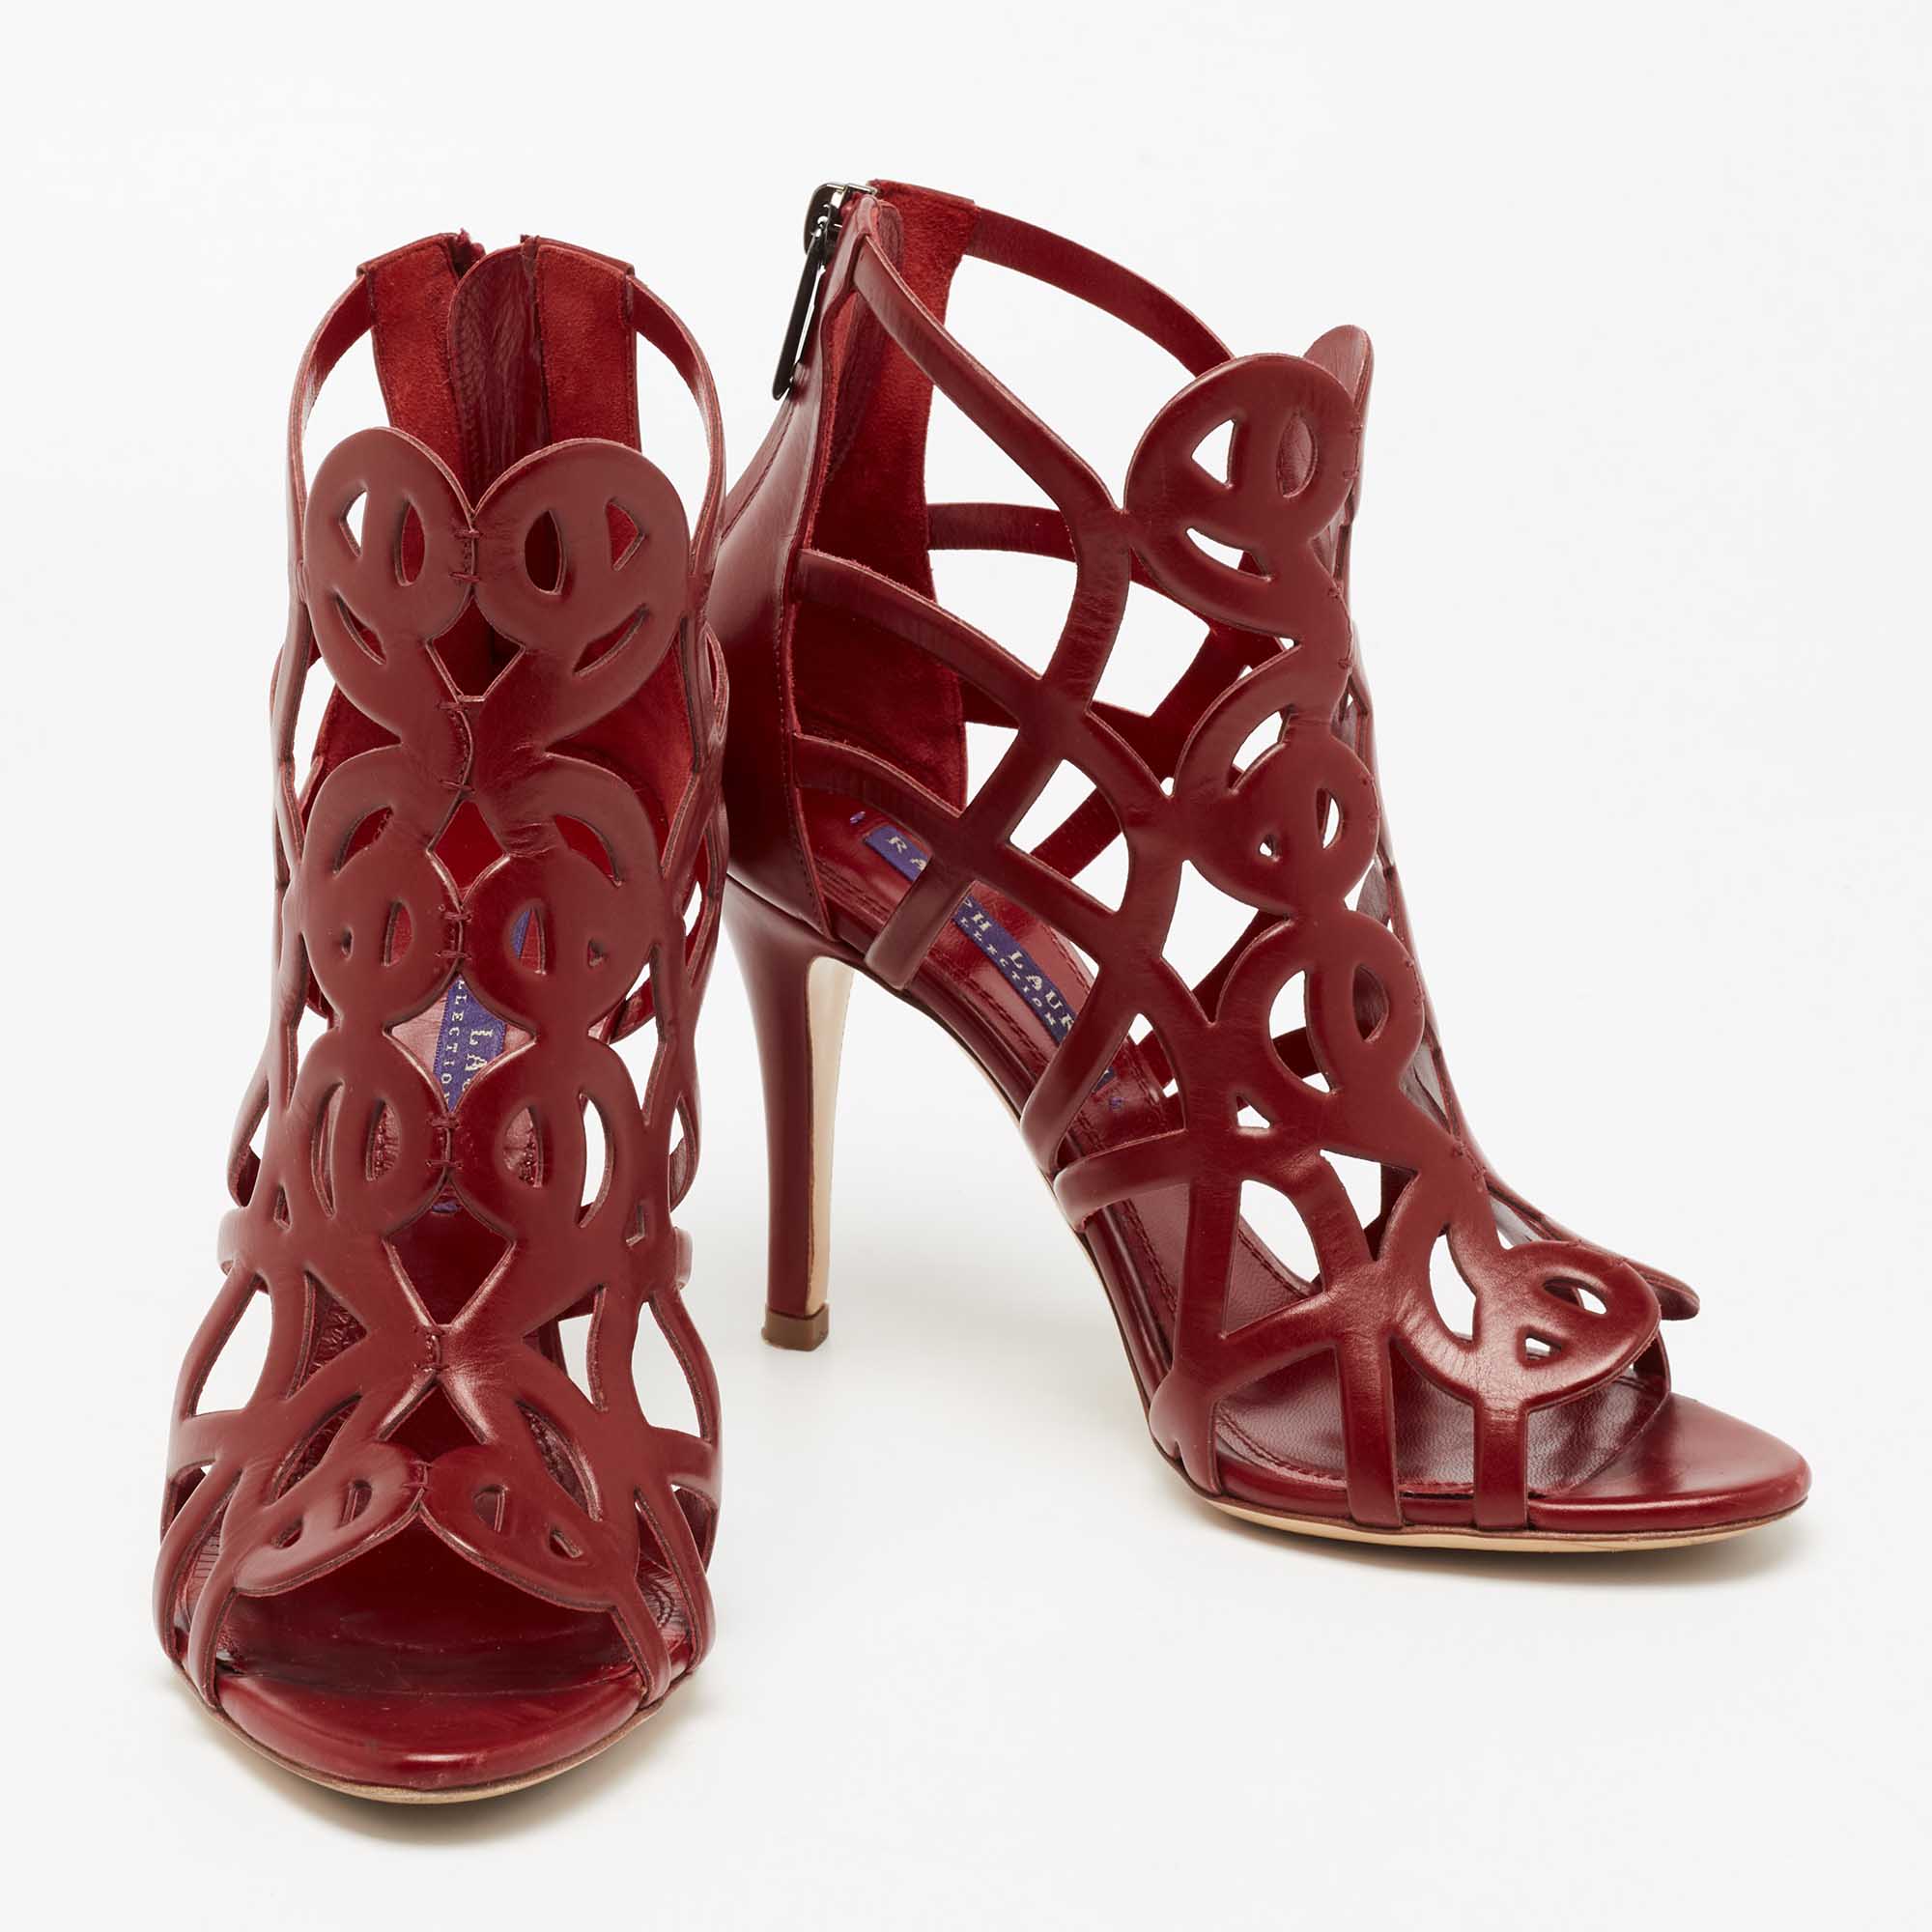 Ralph Lauren Collection Burgundy Leather Cut-Out Sandals Size 36